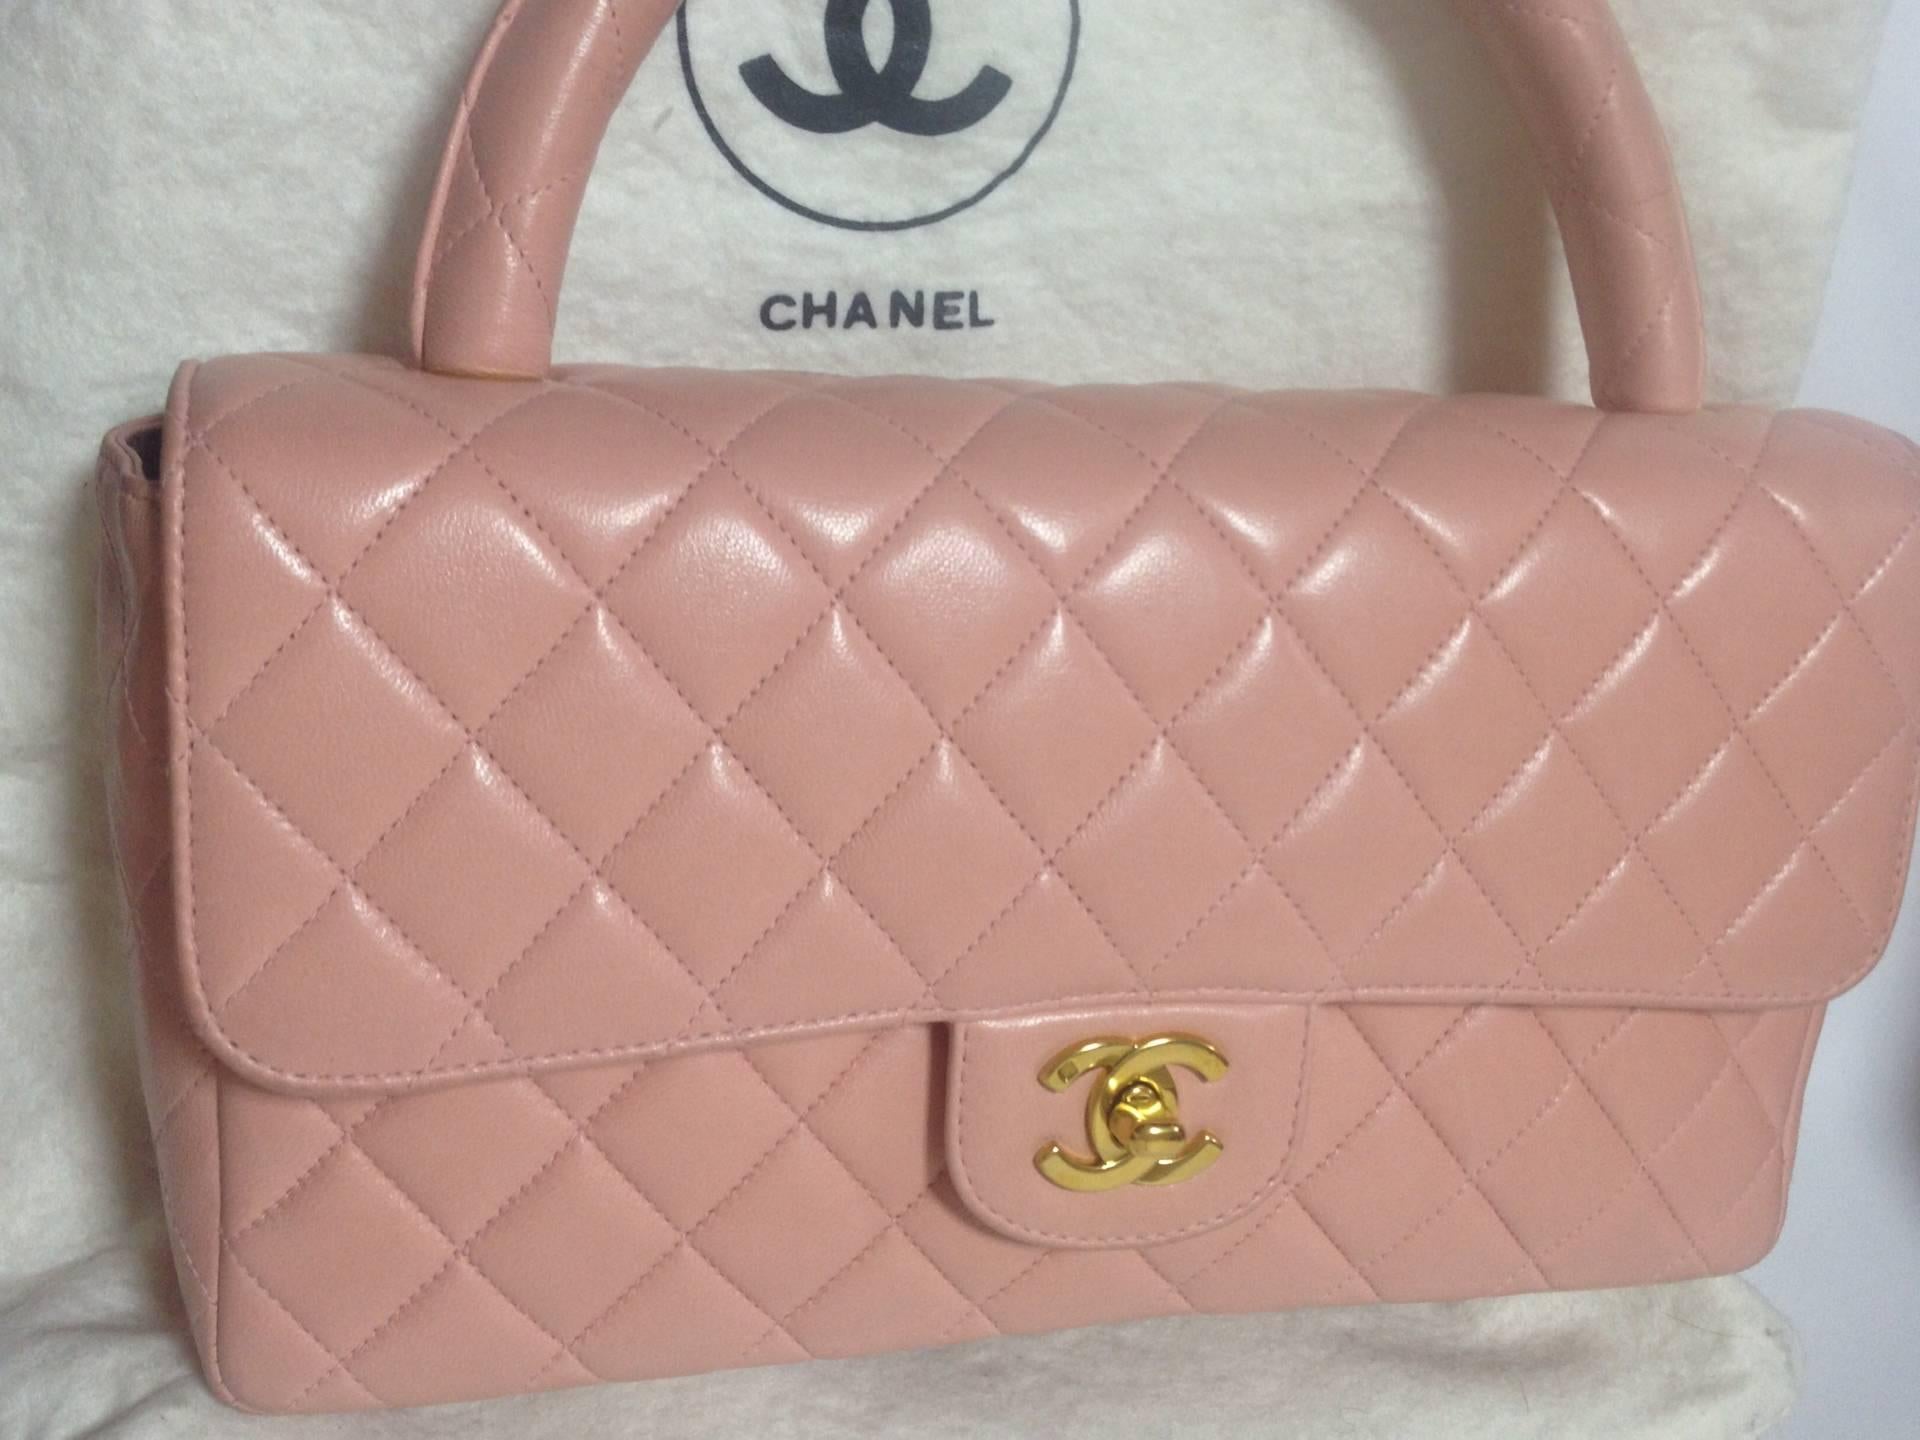 1990. Vintage CHANEL milky pink color lambskin classic 2.55 handbag purse with golden CC. Rare color classic bag.

Introducing another fabulous vintage purse in milky pink lambskin 2.55 style from Chanel back in the 90's.
Classic style but rare and